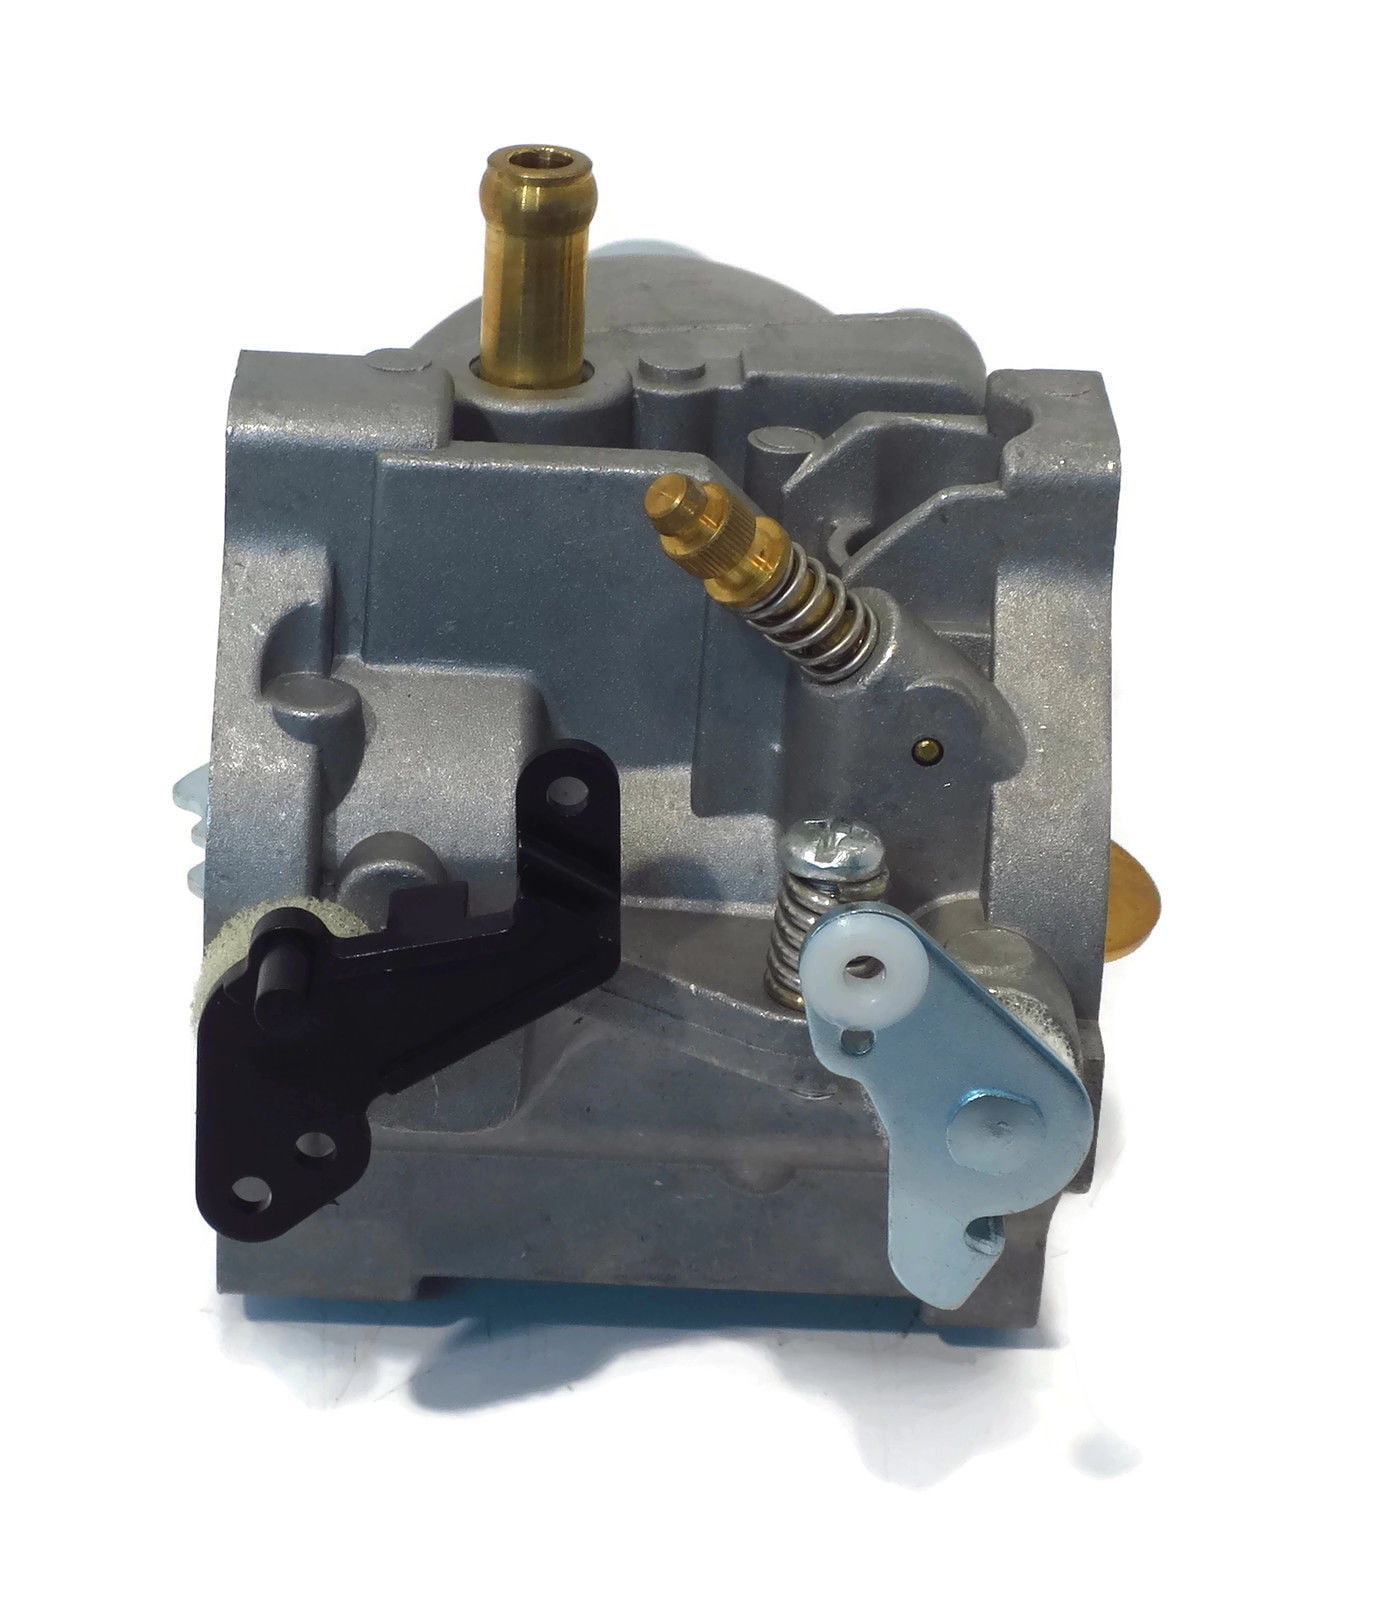 Details about   CARBURETOR carb for Briggs & Stratton 287707 287776 287777 310707 310777 28N707 